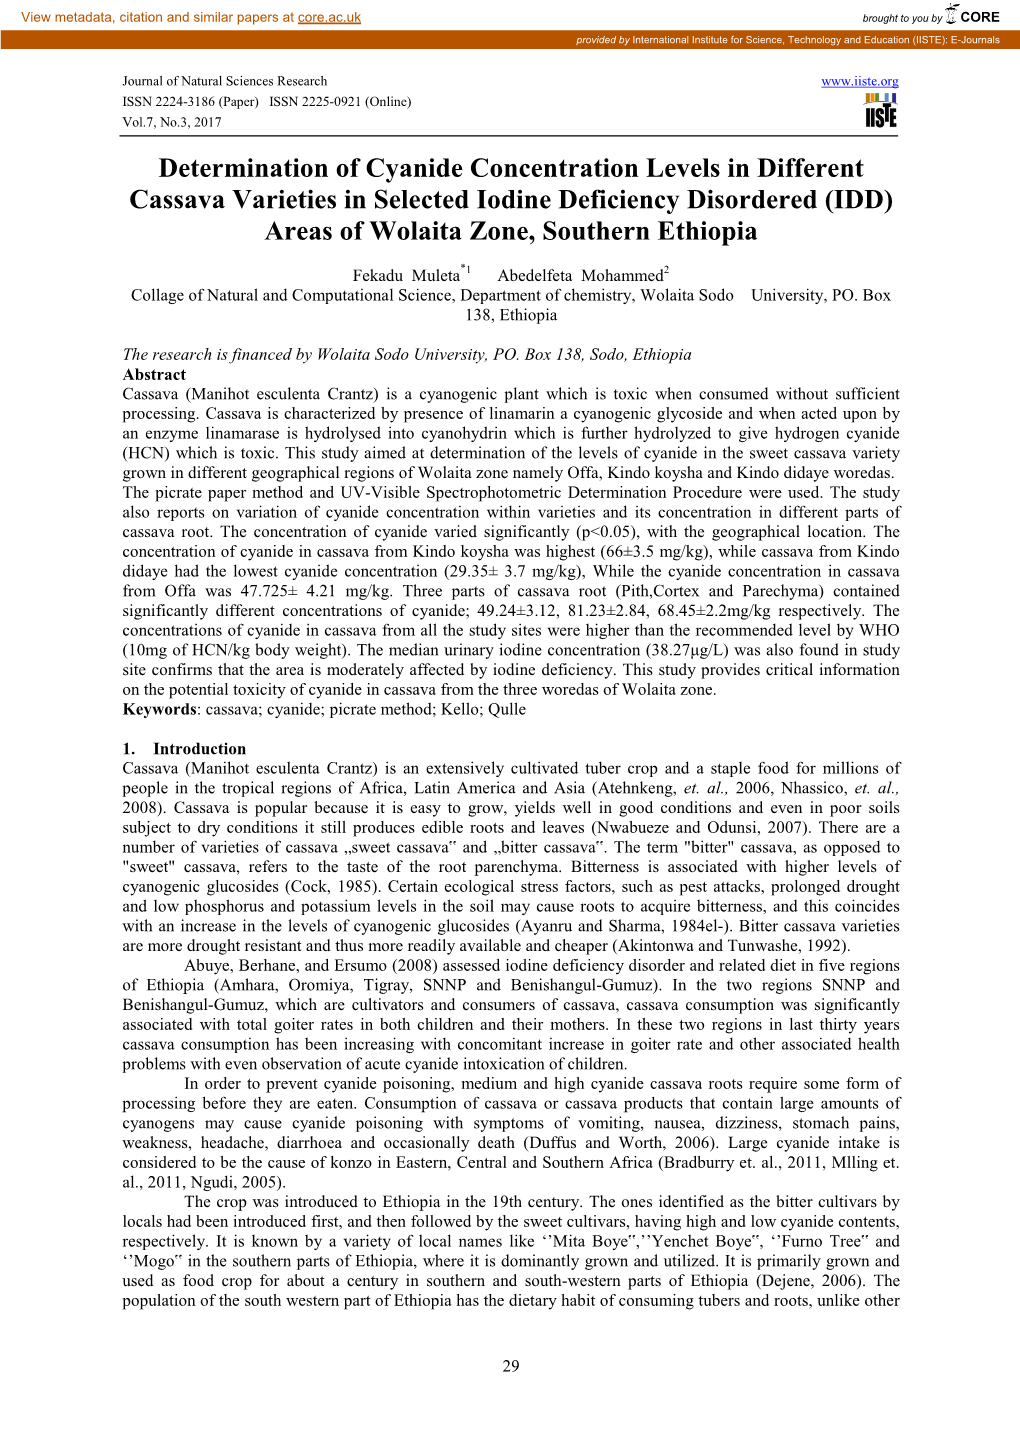 Determination of Cyanide Concentration Levels in Different Cassava Varieties in Selected Iodine Deficiency Disordered (IDD) Areas of Wolaita Zone, Southern Ethiopia